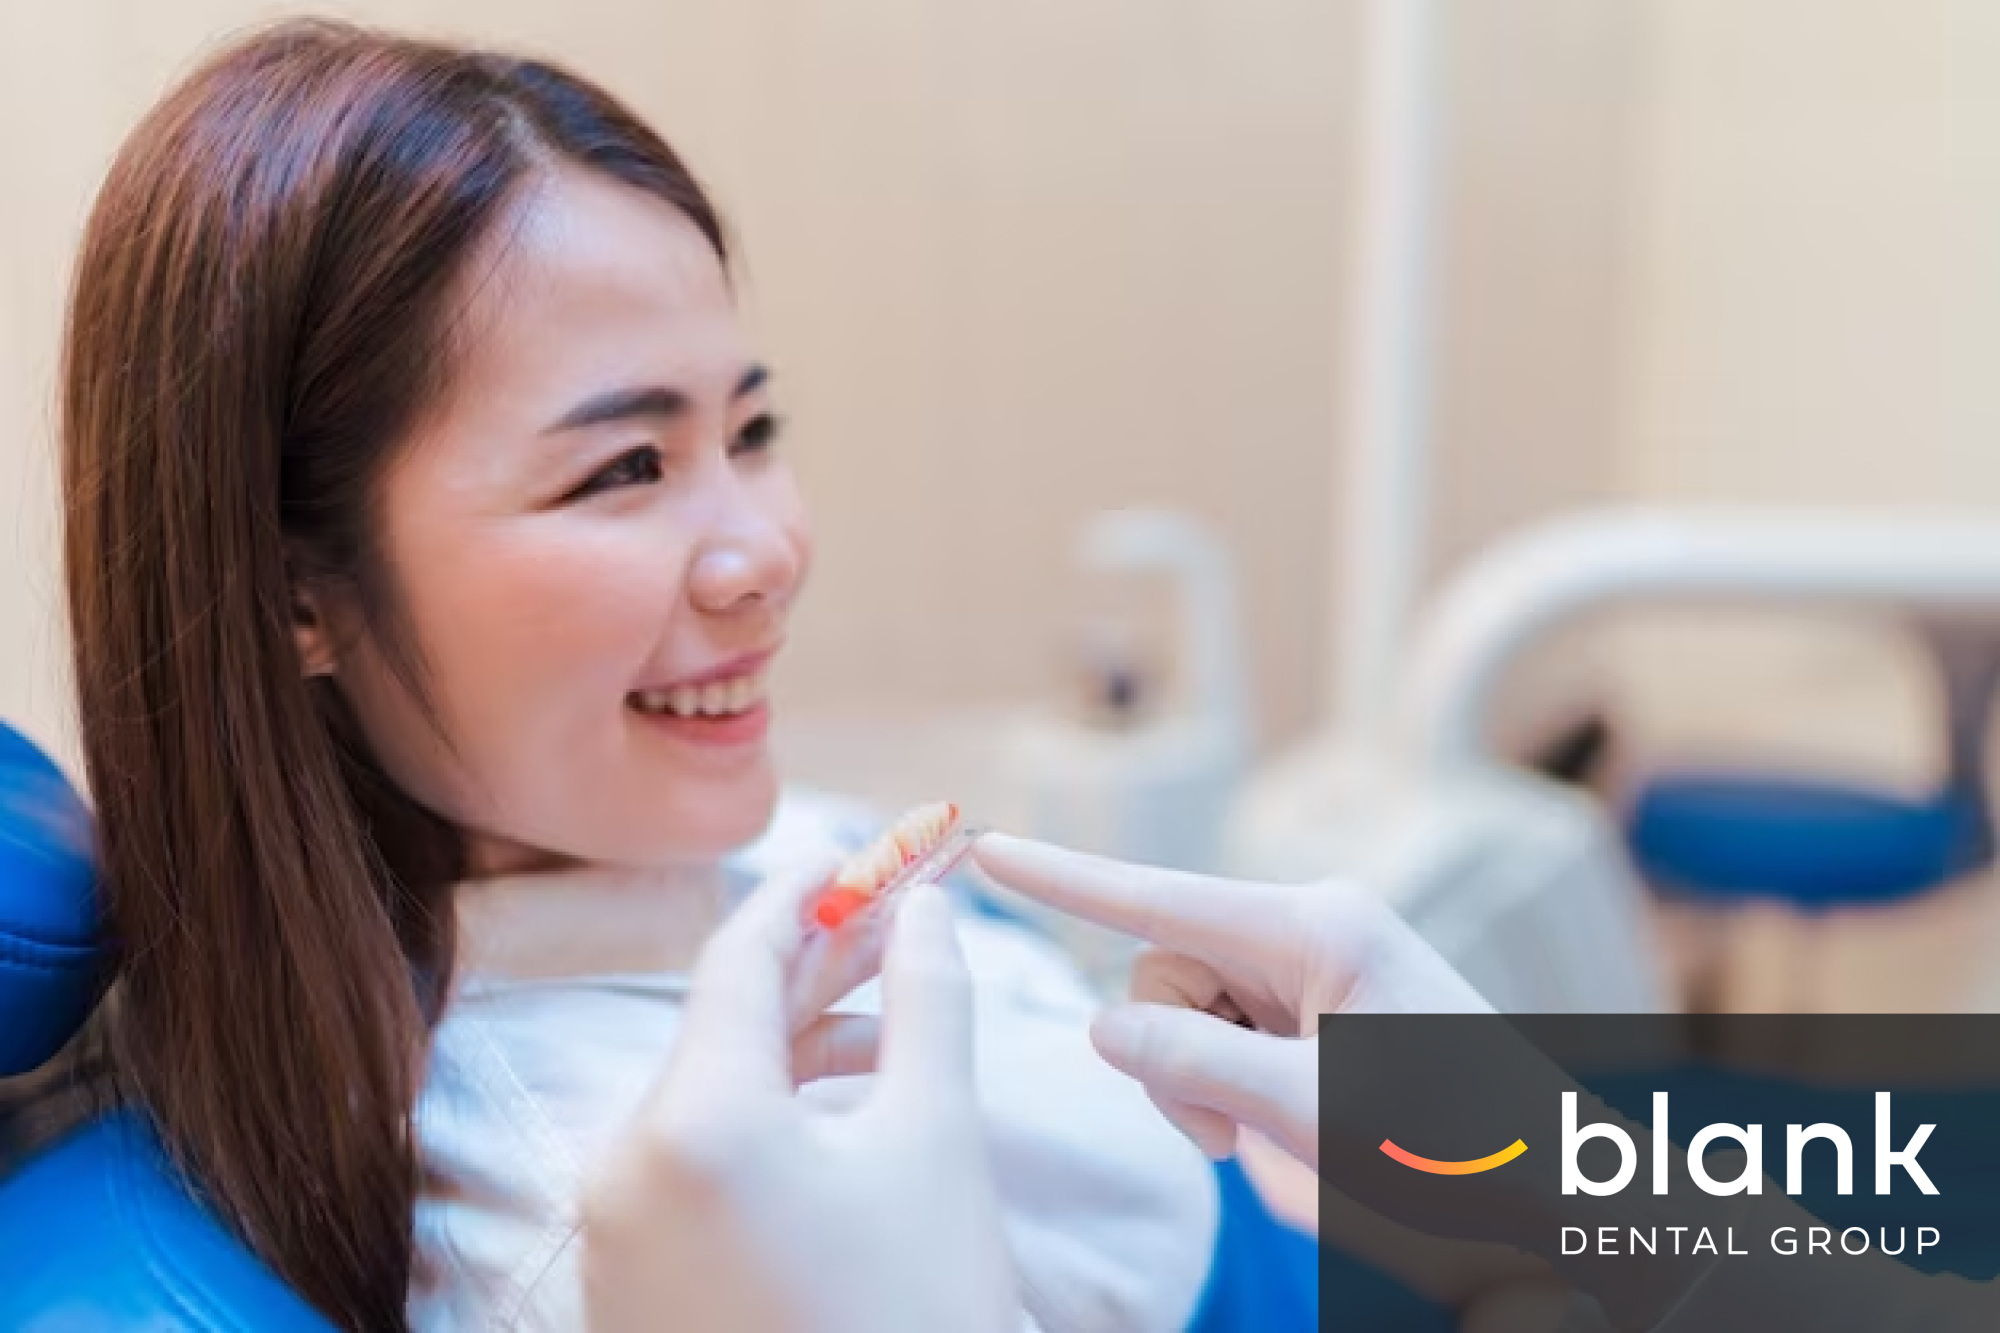 A woman is smiling while a dental professional shows her a dental model at Blank Dental Group.